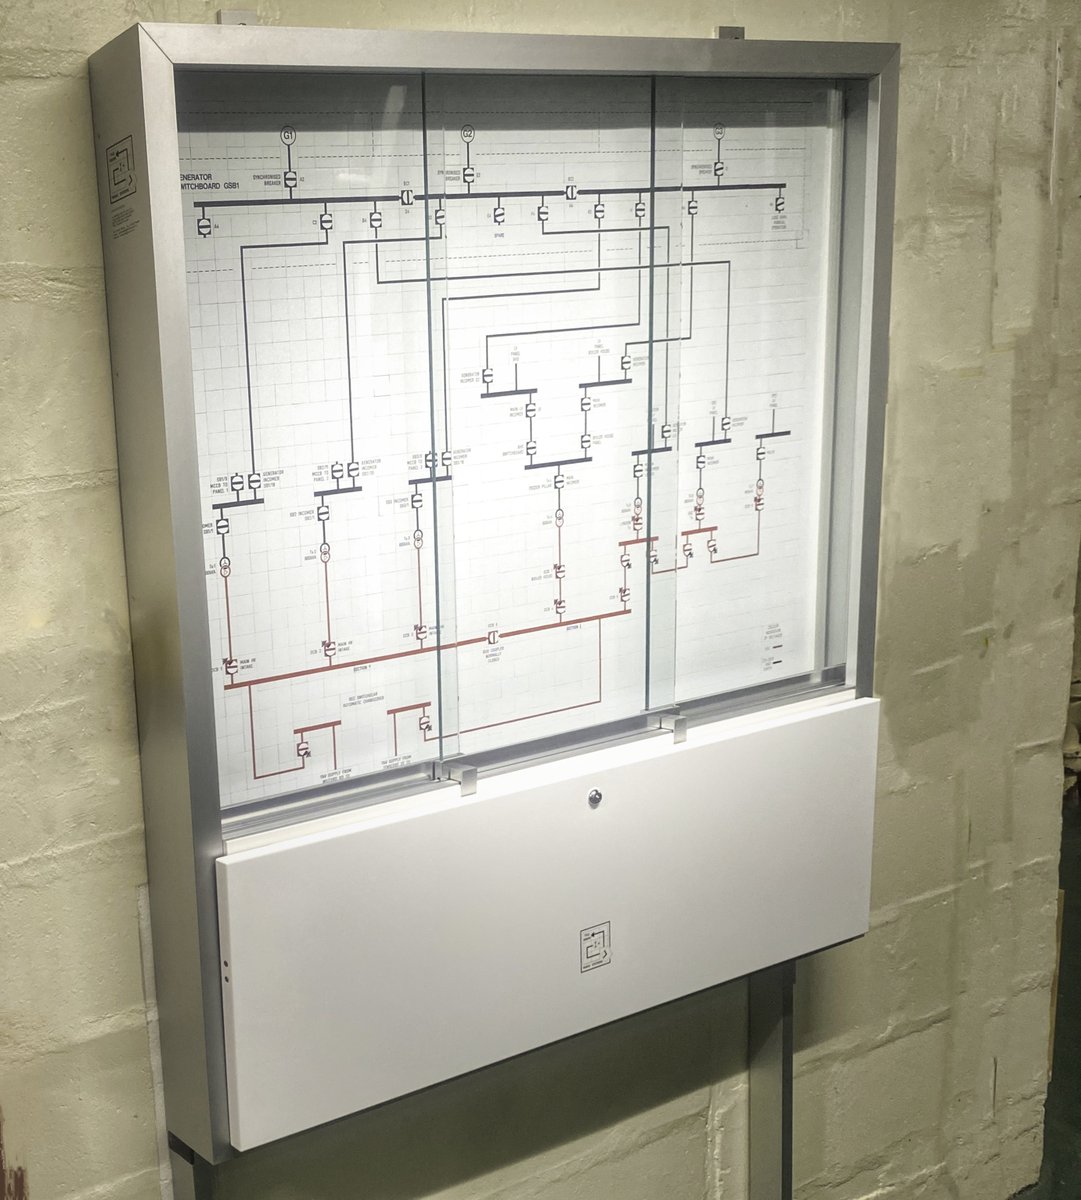 PROJECT UPDATE: We recently worked with Trust Engineers to create a schematic diagram of  existing HV/LV distribution systems in electronic format, converted into a Tilegram mimic system providing a visual overview of the HV/LV distribution network. 
#RDJ #ProjectUpdate #Tilegram